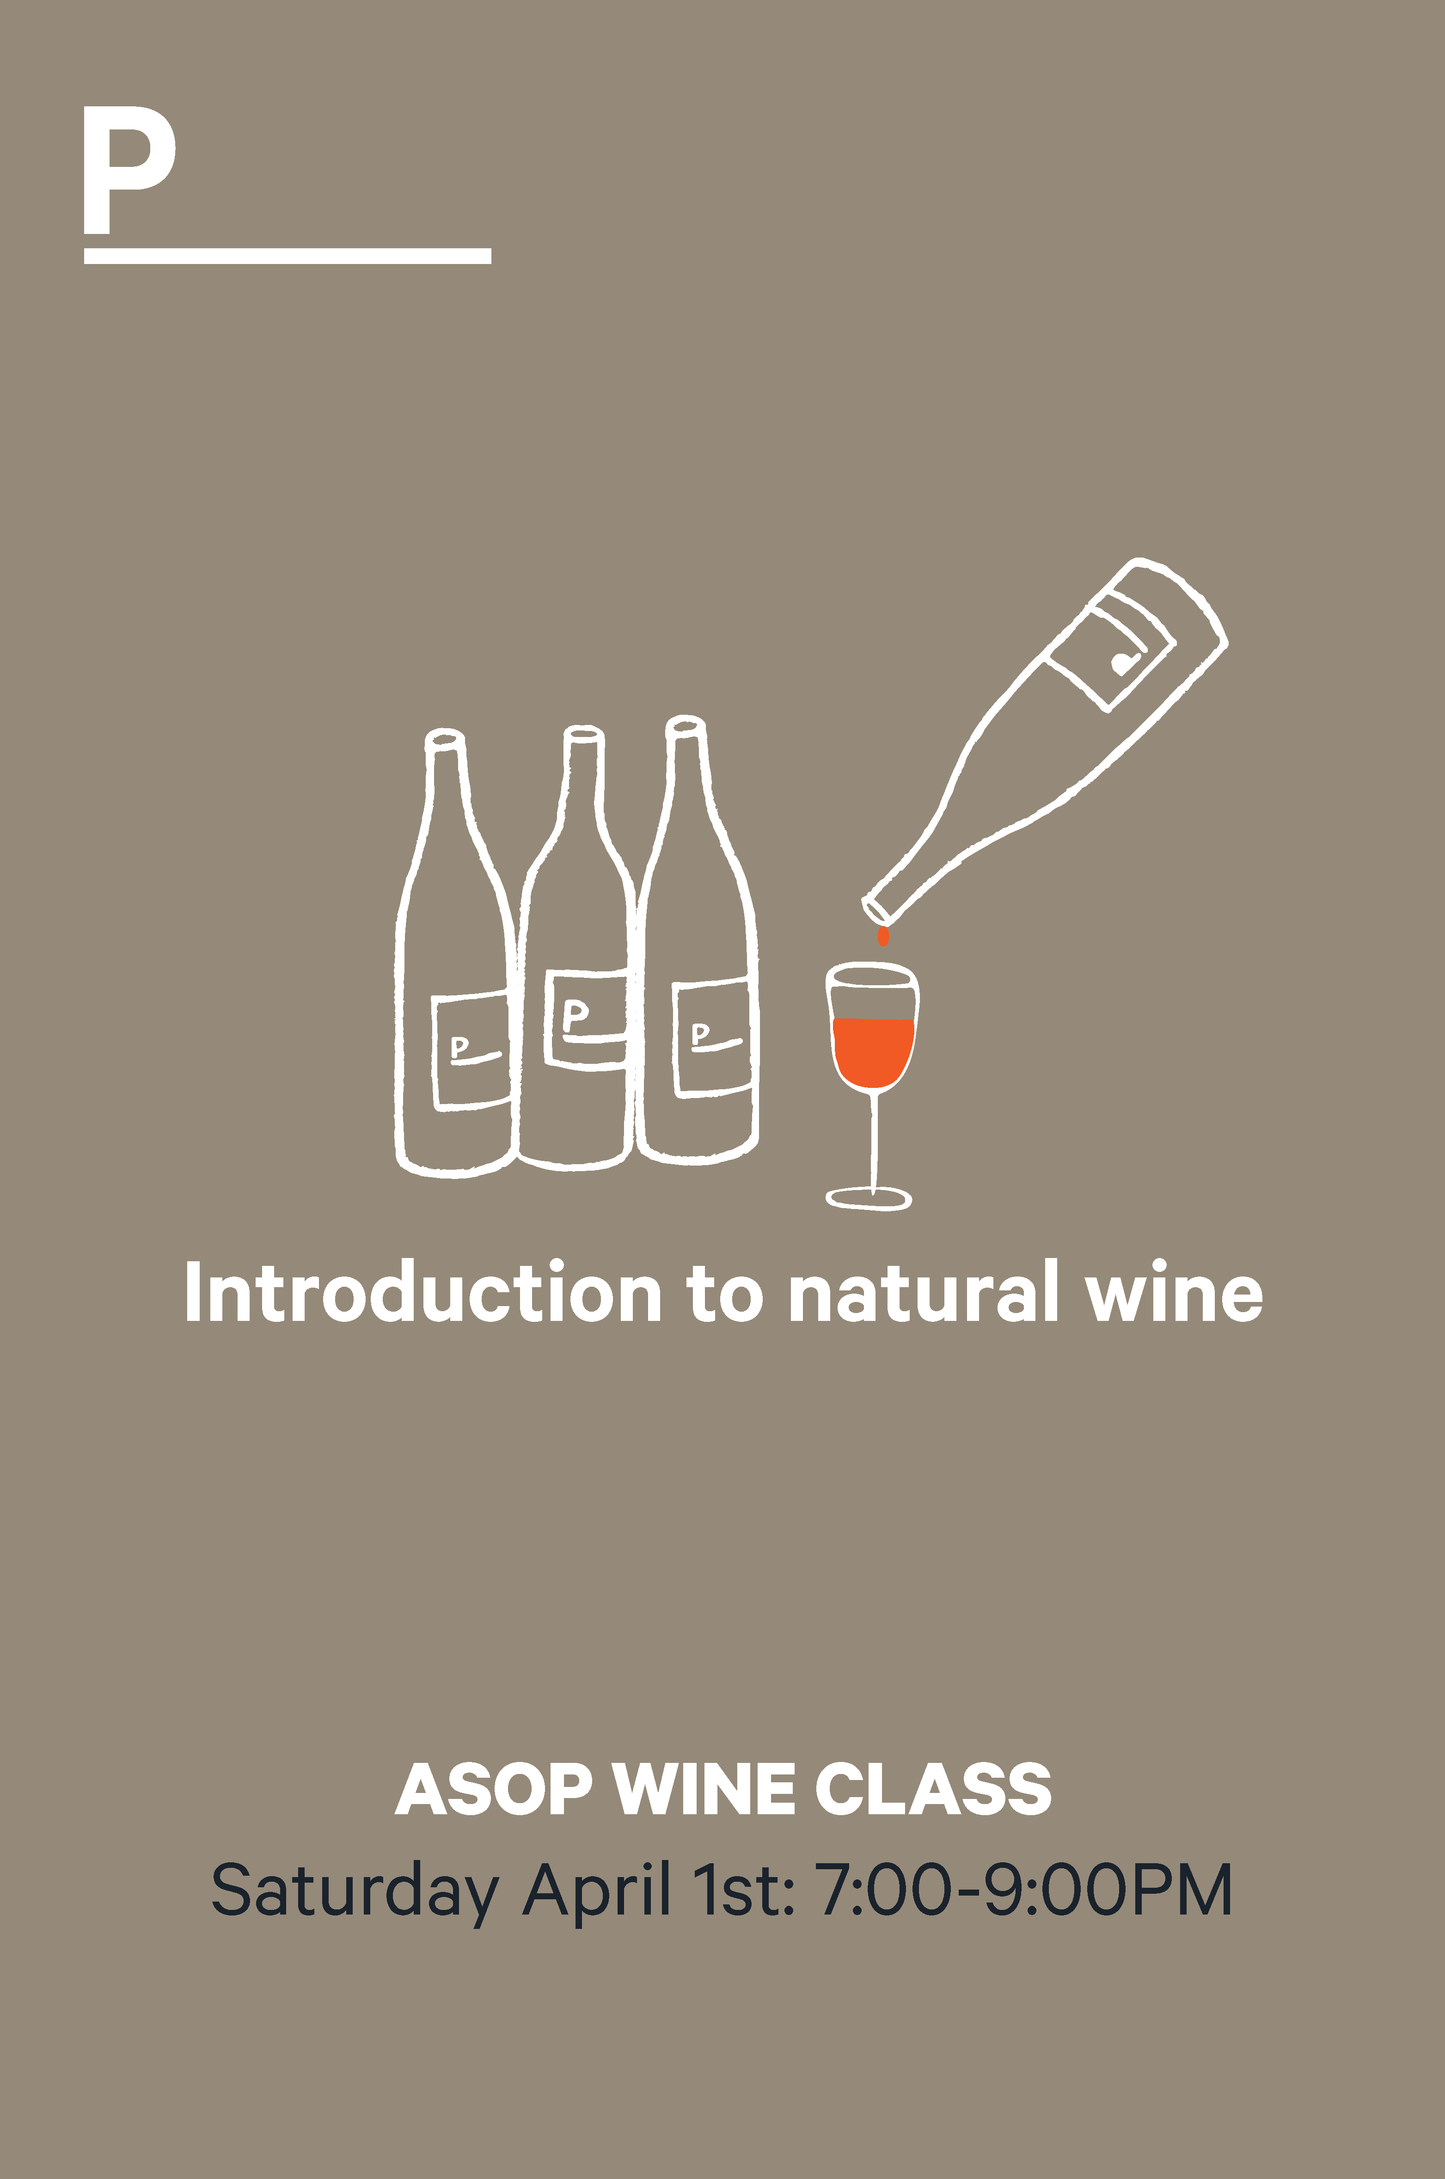 ASOP Wine Class: Introduction to Natural Wine